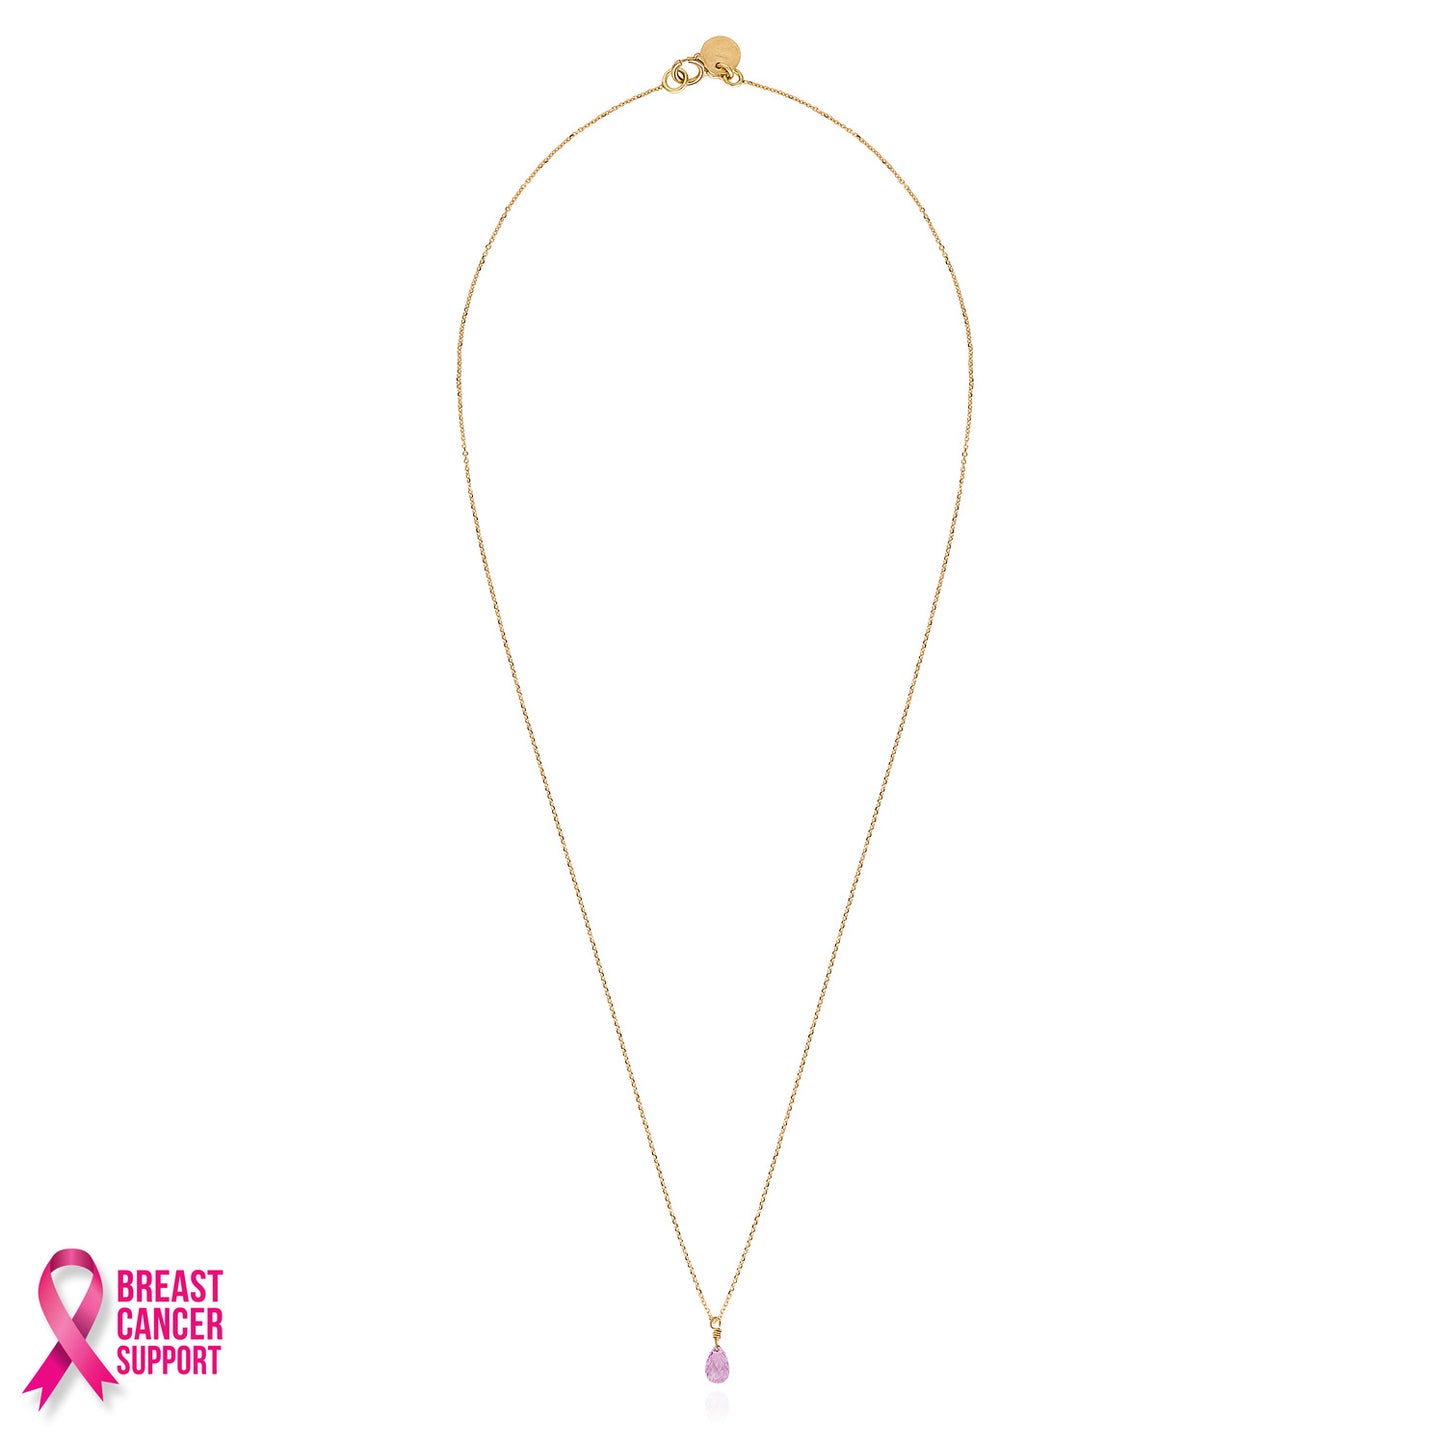 Sweet Pea 18ct yellow gold chain with pink sapphire briolette drop pendant. 20% of sale going to Breast Cancer Support 